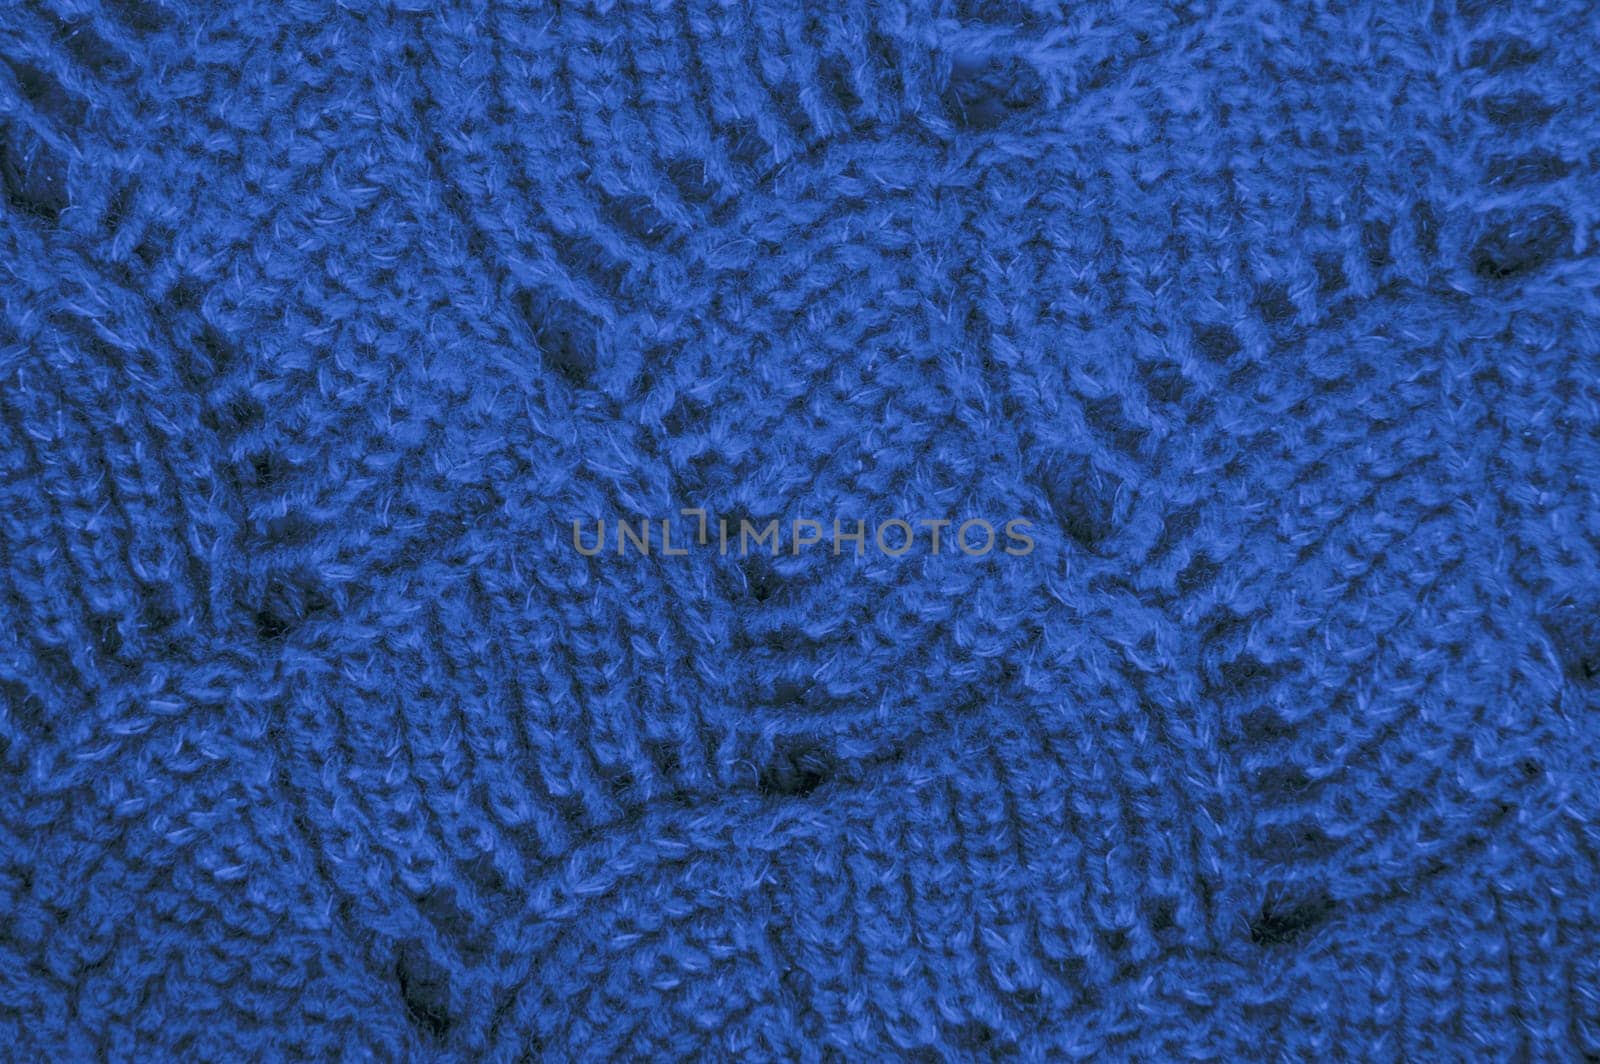 Knitted Blanket. Abstract Woolen Textile. Handmade Christmas Background. Detail Knitted Sweater. Blue Structure Thread. Nordic Xmas Cloth. Soft Plaid Cashmere. Linen Knitted Sweater.